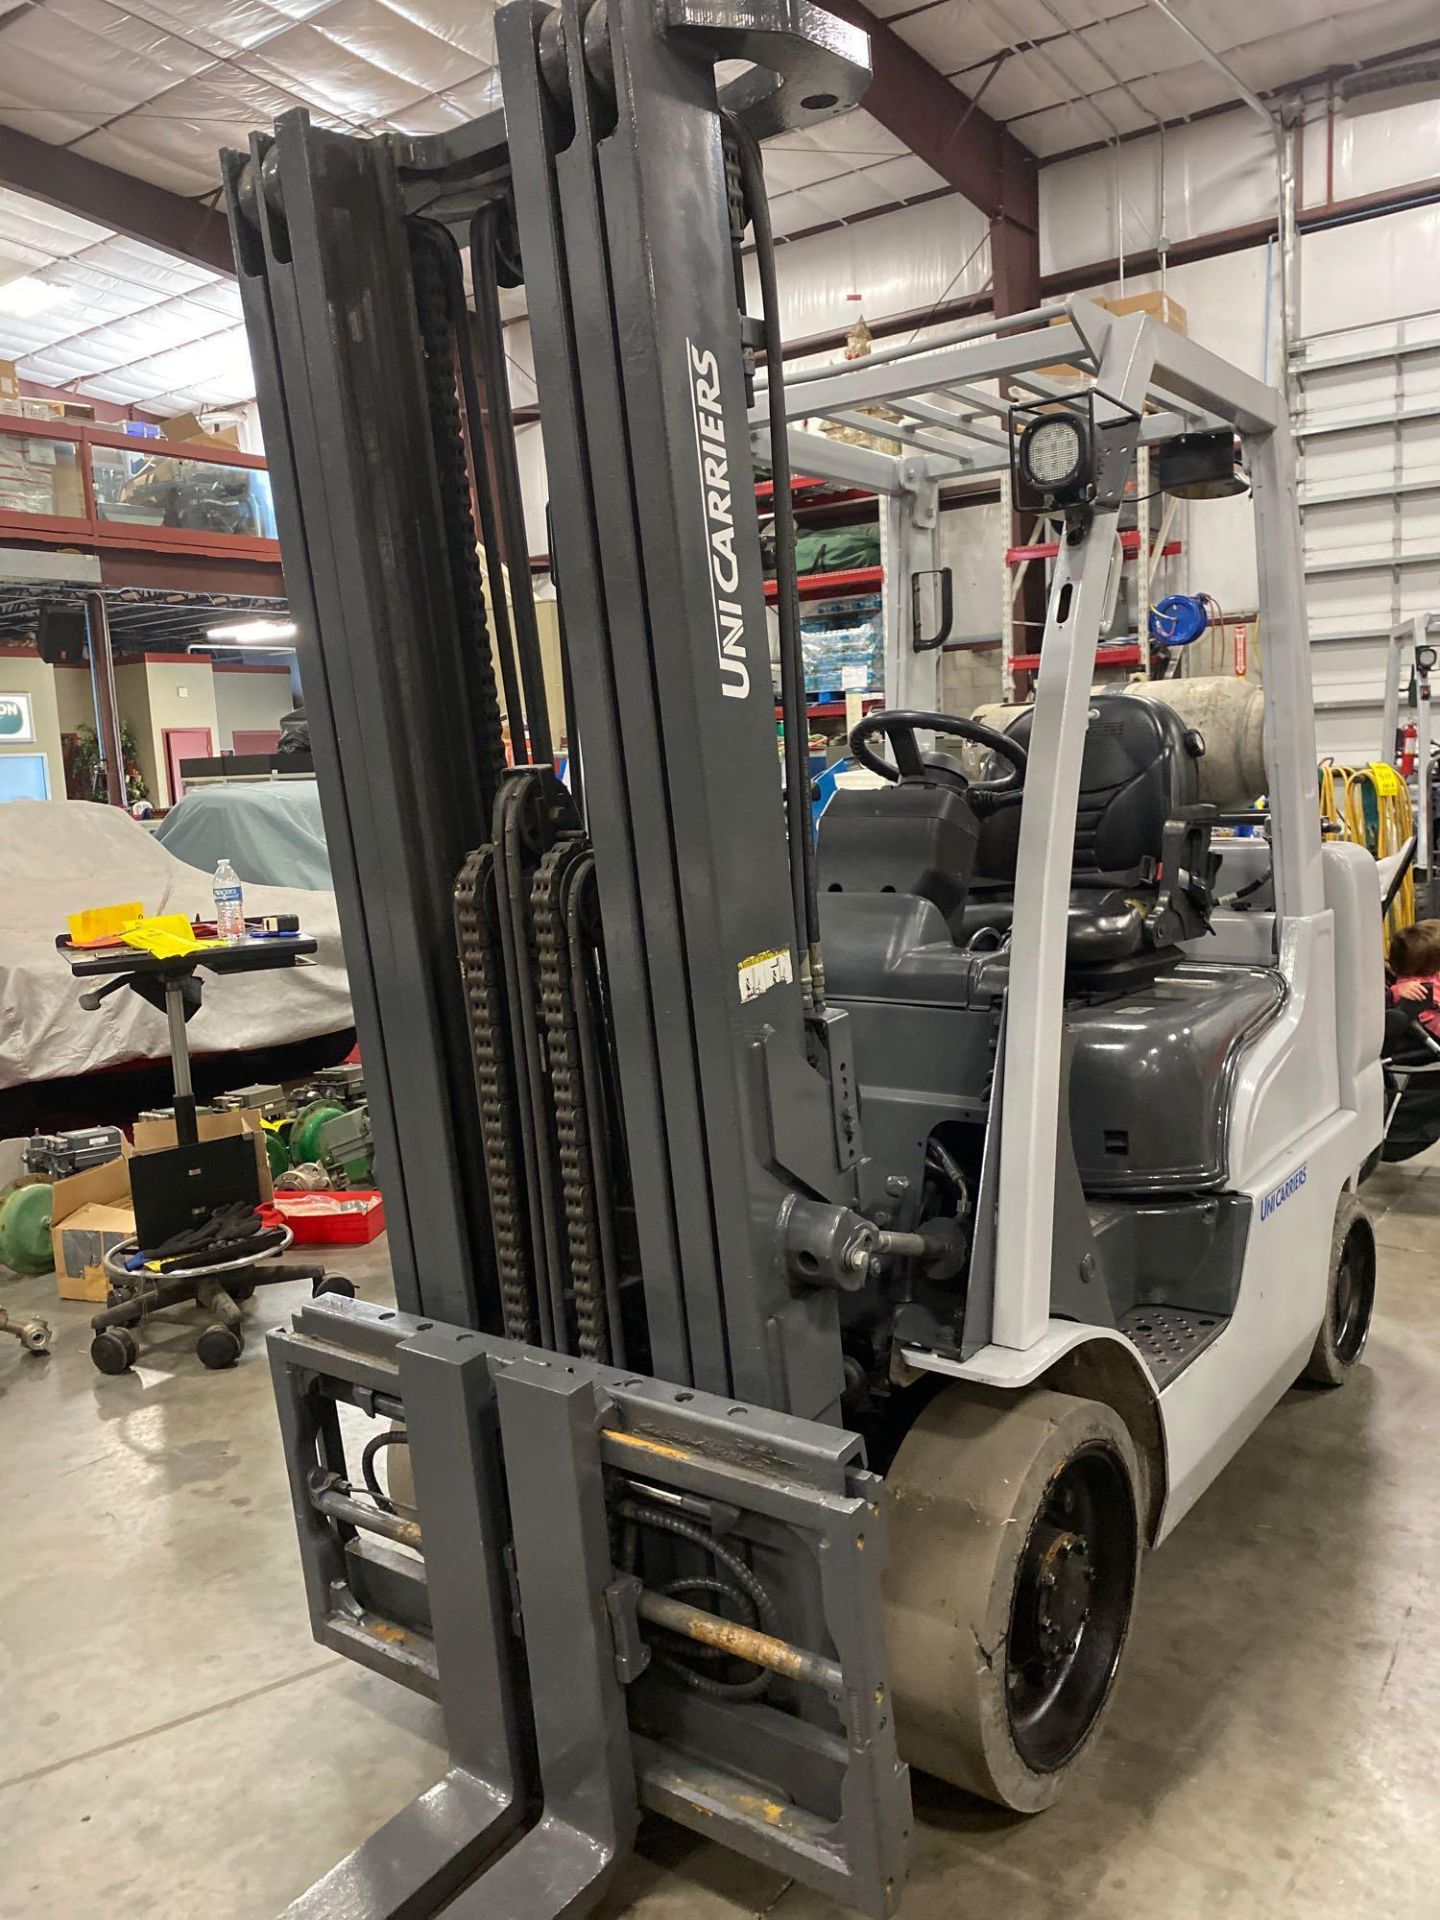 2014 UNICARRIERS LP FORKLIFT MODEL MCUG1F2F30LV, APPROX. 6,000 LB CAPACITY - Image 5 of 10